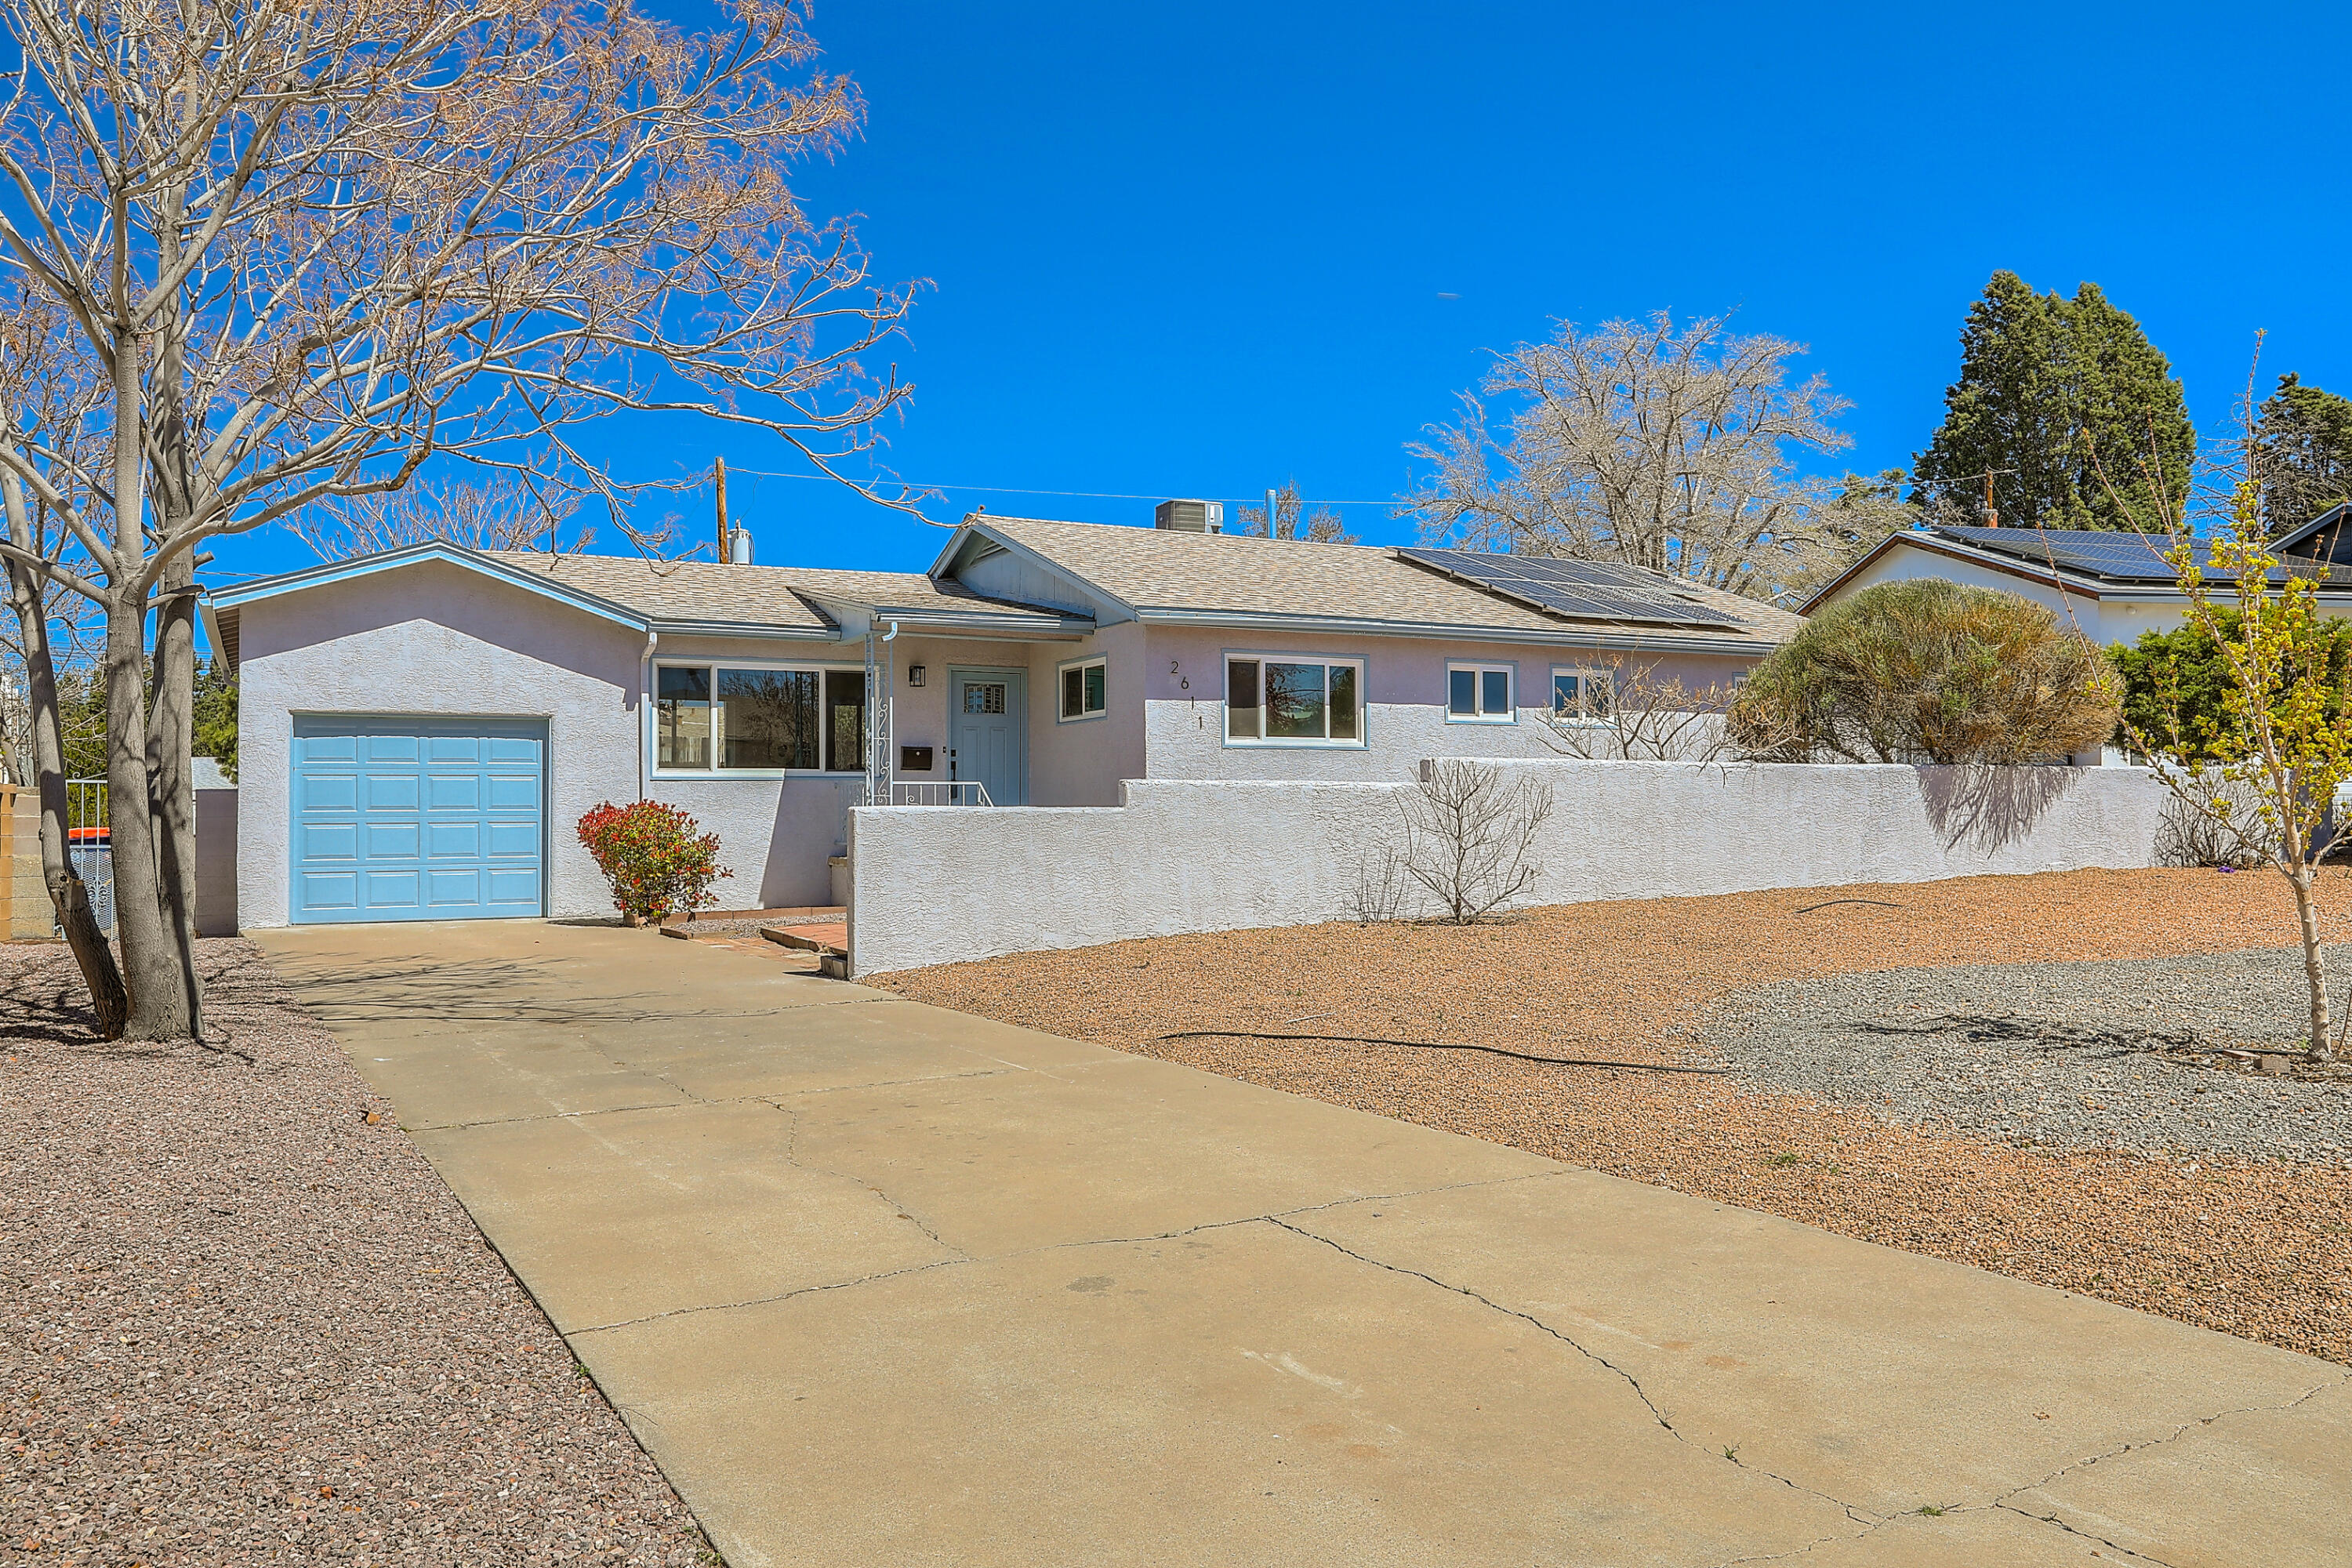 Charming home near UNM area boasts newly remodeled features including refinished hardwood floors, updated cabinets, quartz countertops, and custom tile work. Enjoy the convenience of walking to parks, restaurants, and the university. With paid-in-full solar, this home offers both modern amenities and sustainability.